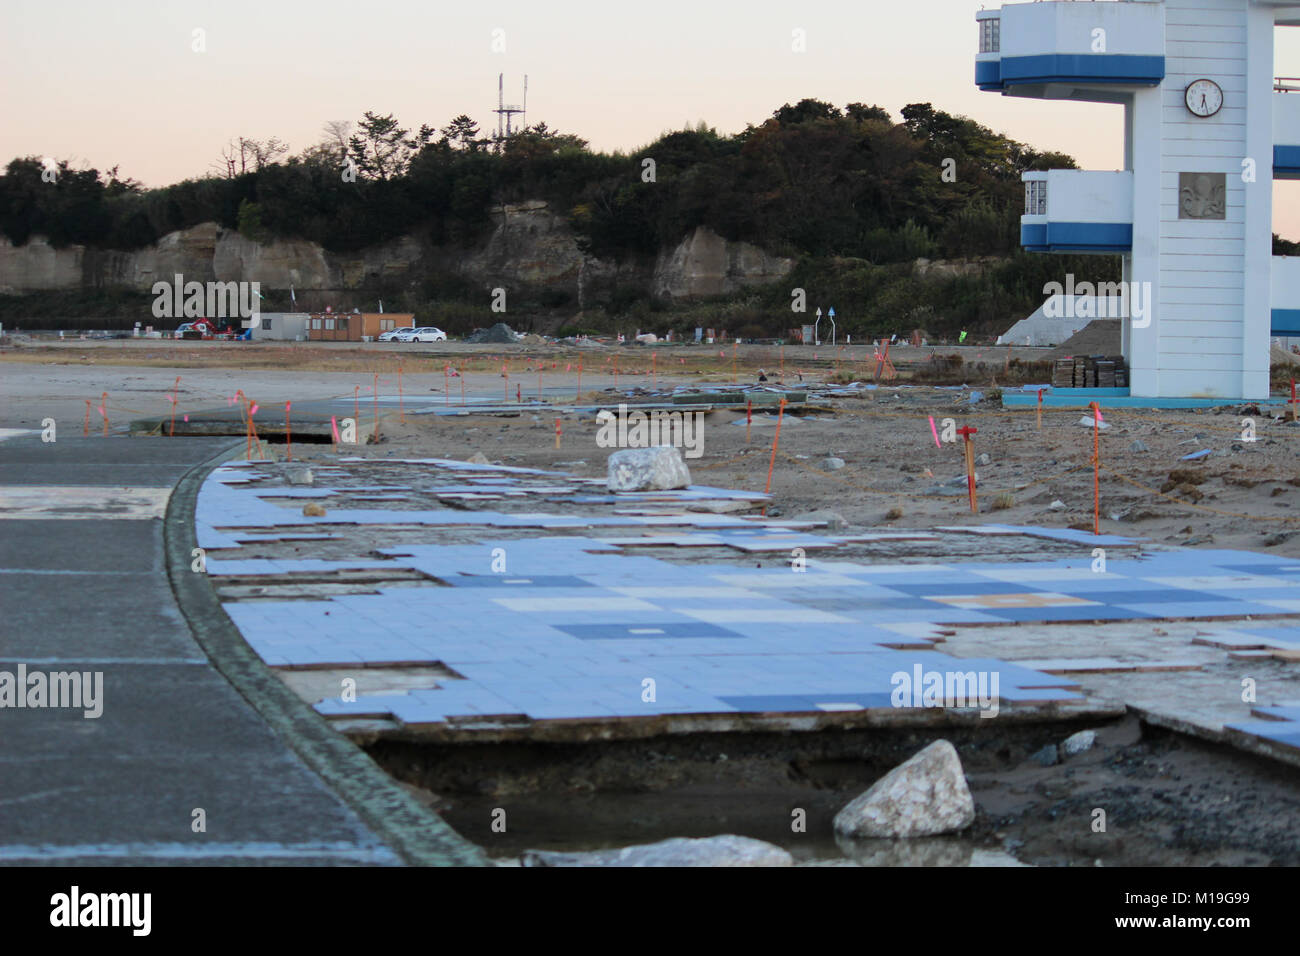 4 November 15 Soma Fukushima Japan A Pavement Destroyed By Tsunami Disaster In Matsukawaura Beach Soma City Japan The Beach Which Is Considered A Local Touristic Point Has Been Closed Due To